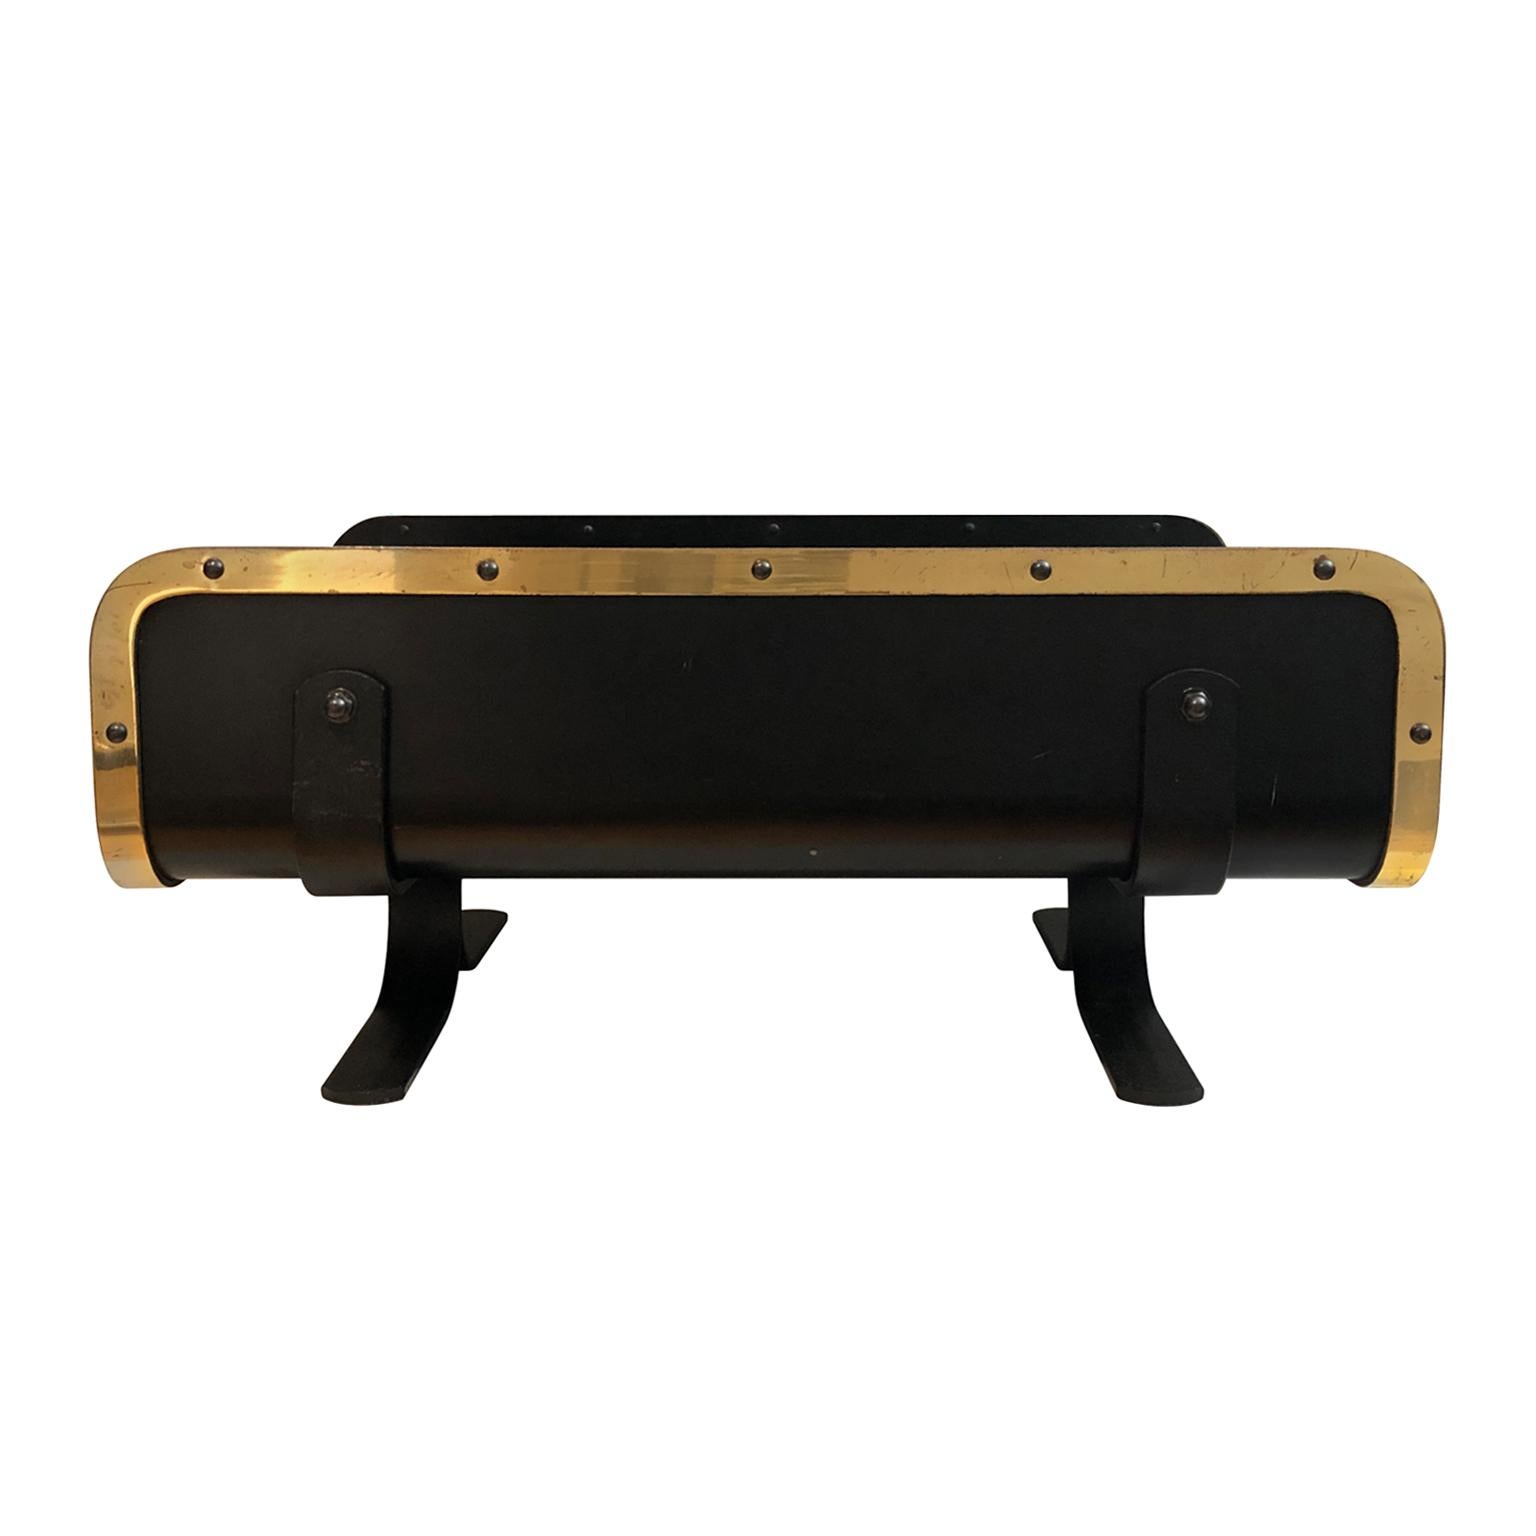 Black metal magazine rack/log stand with brass banding and bolt detail, USA, 1970s.